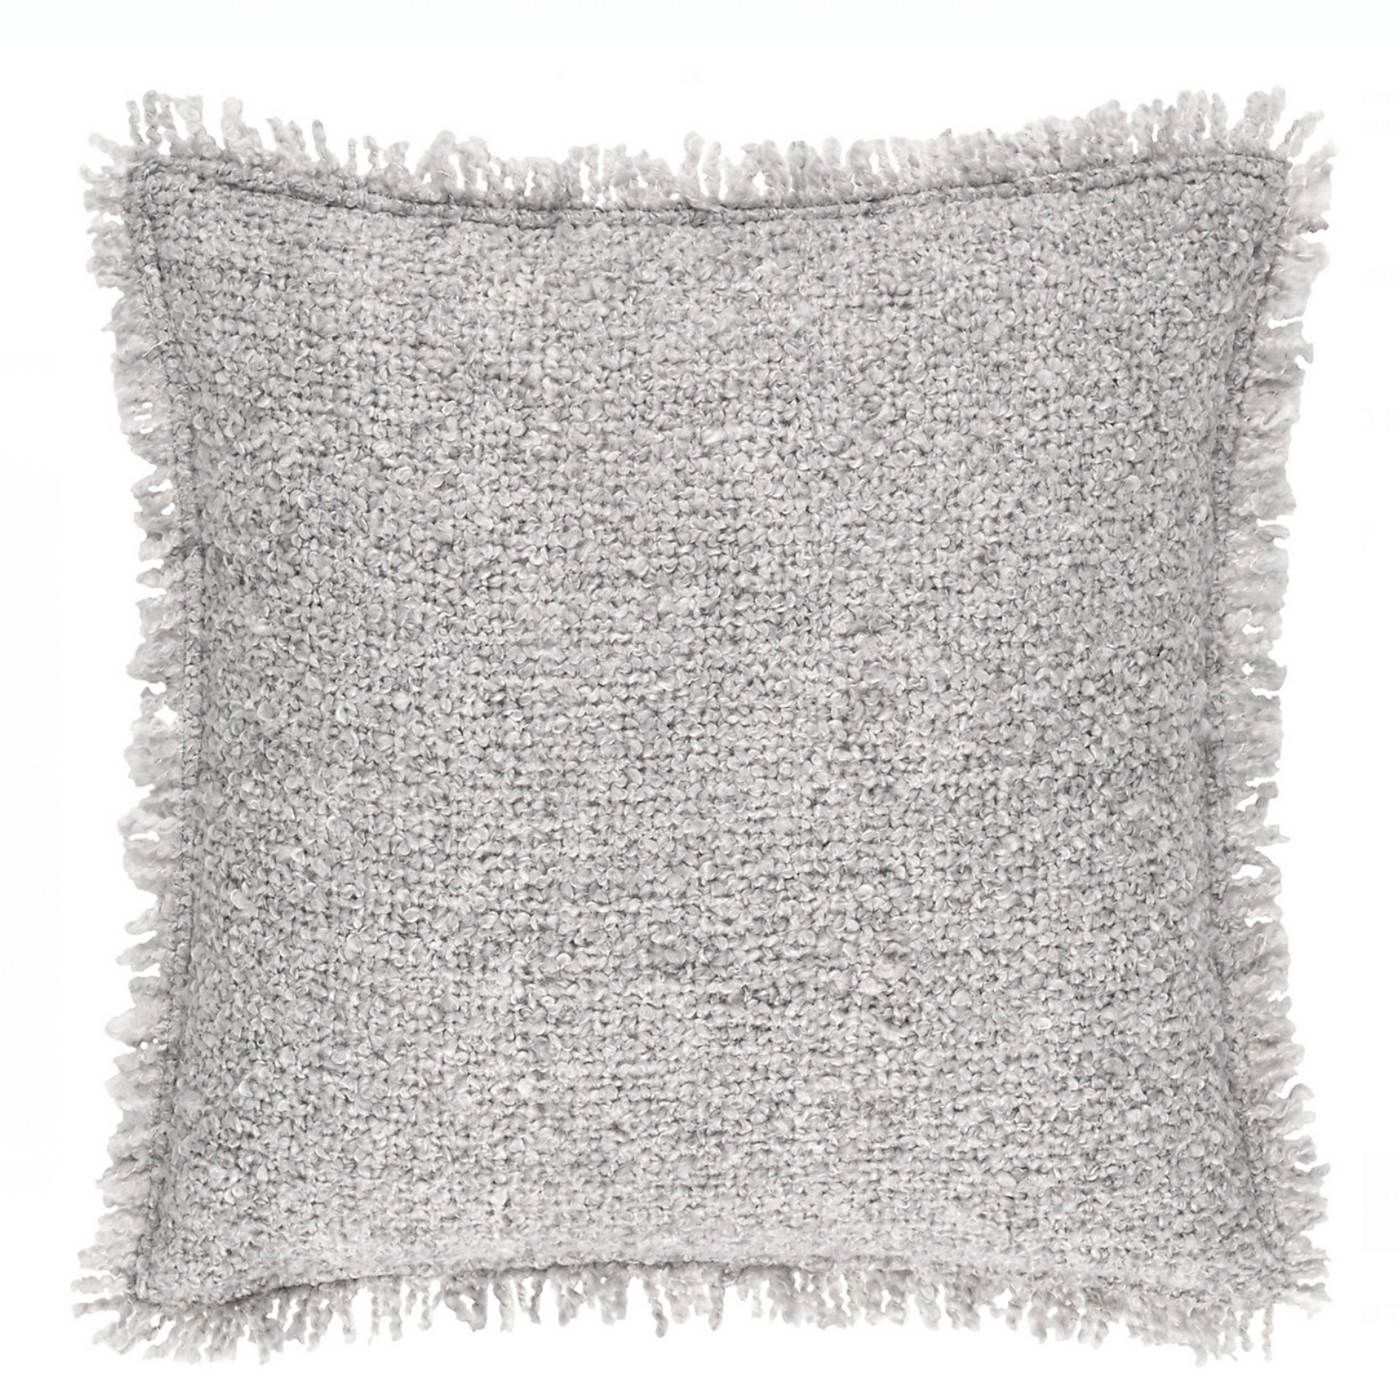 PILLOW DECORATIVE INDOOR/OUTDOOR CHUNKY BOUCLE (Available in 2 Colors)